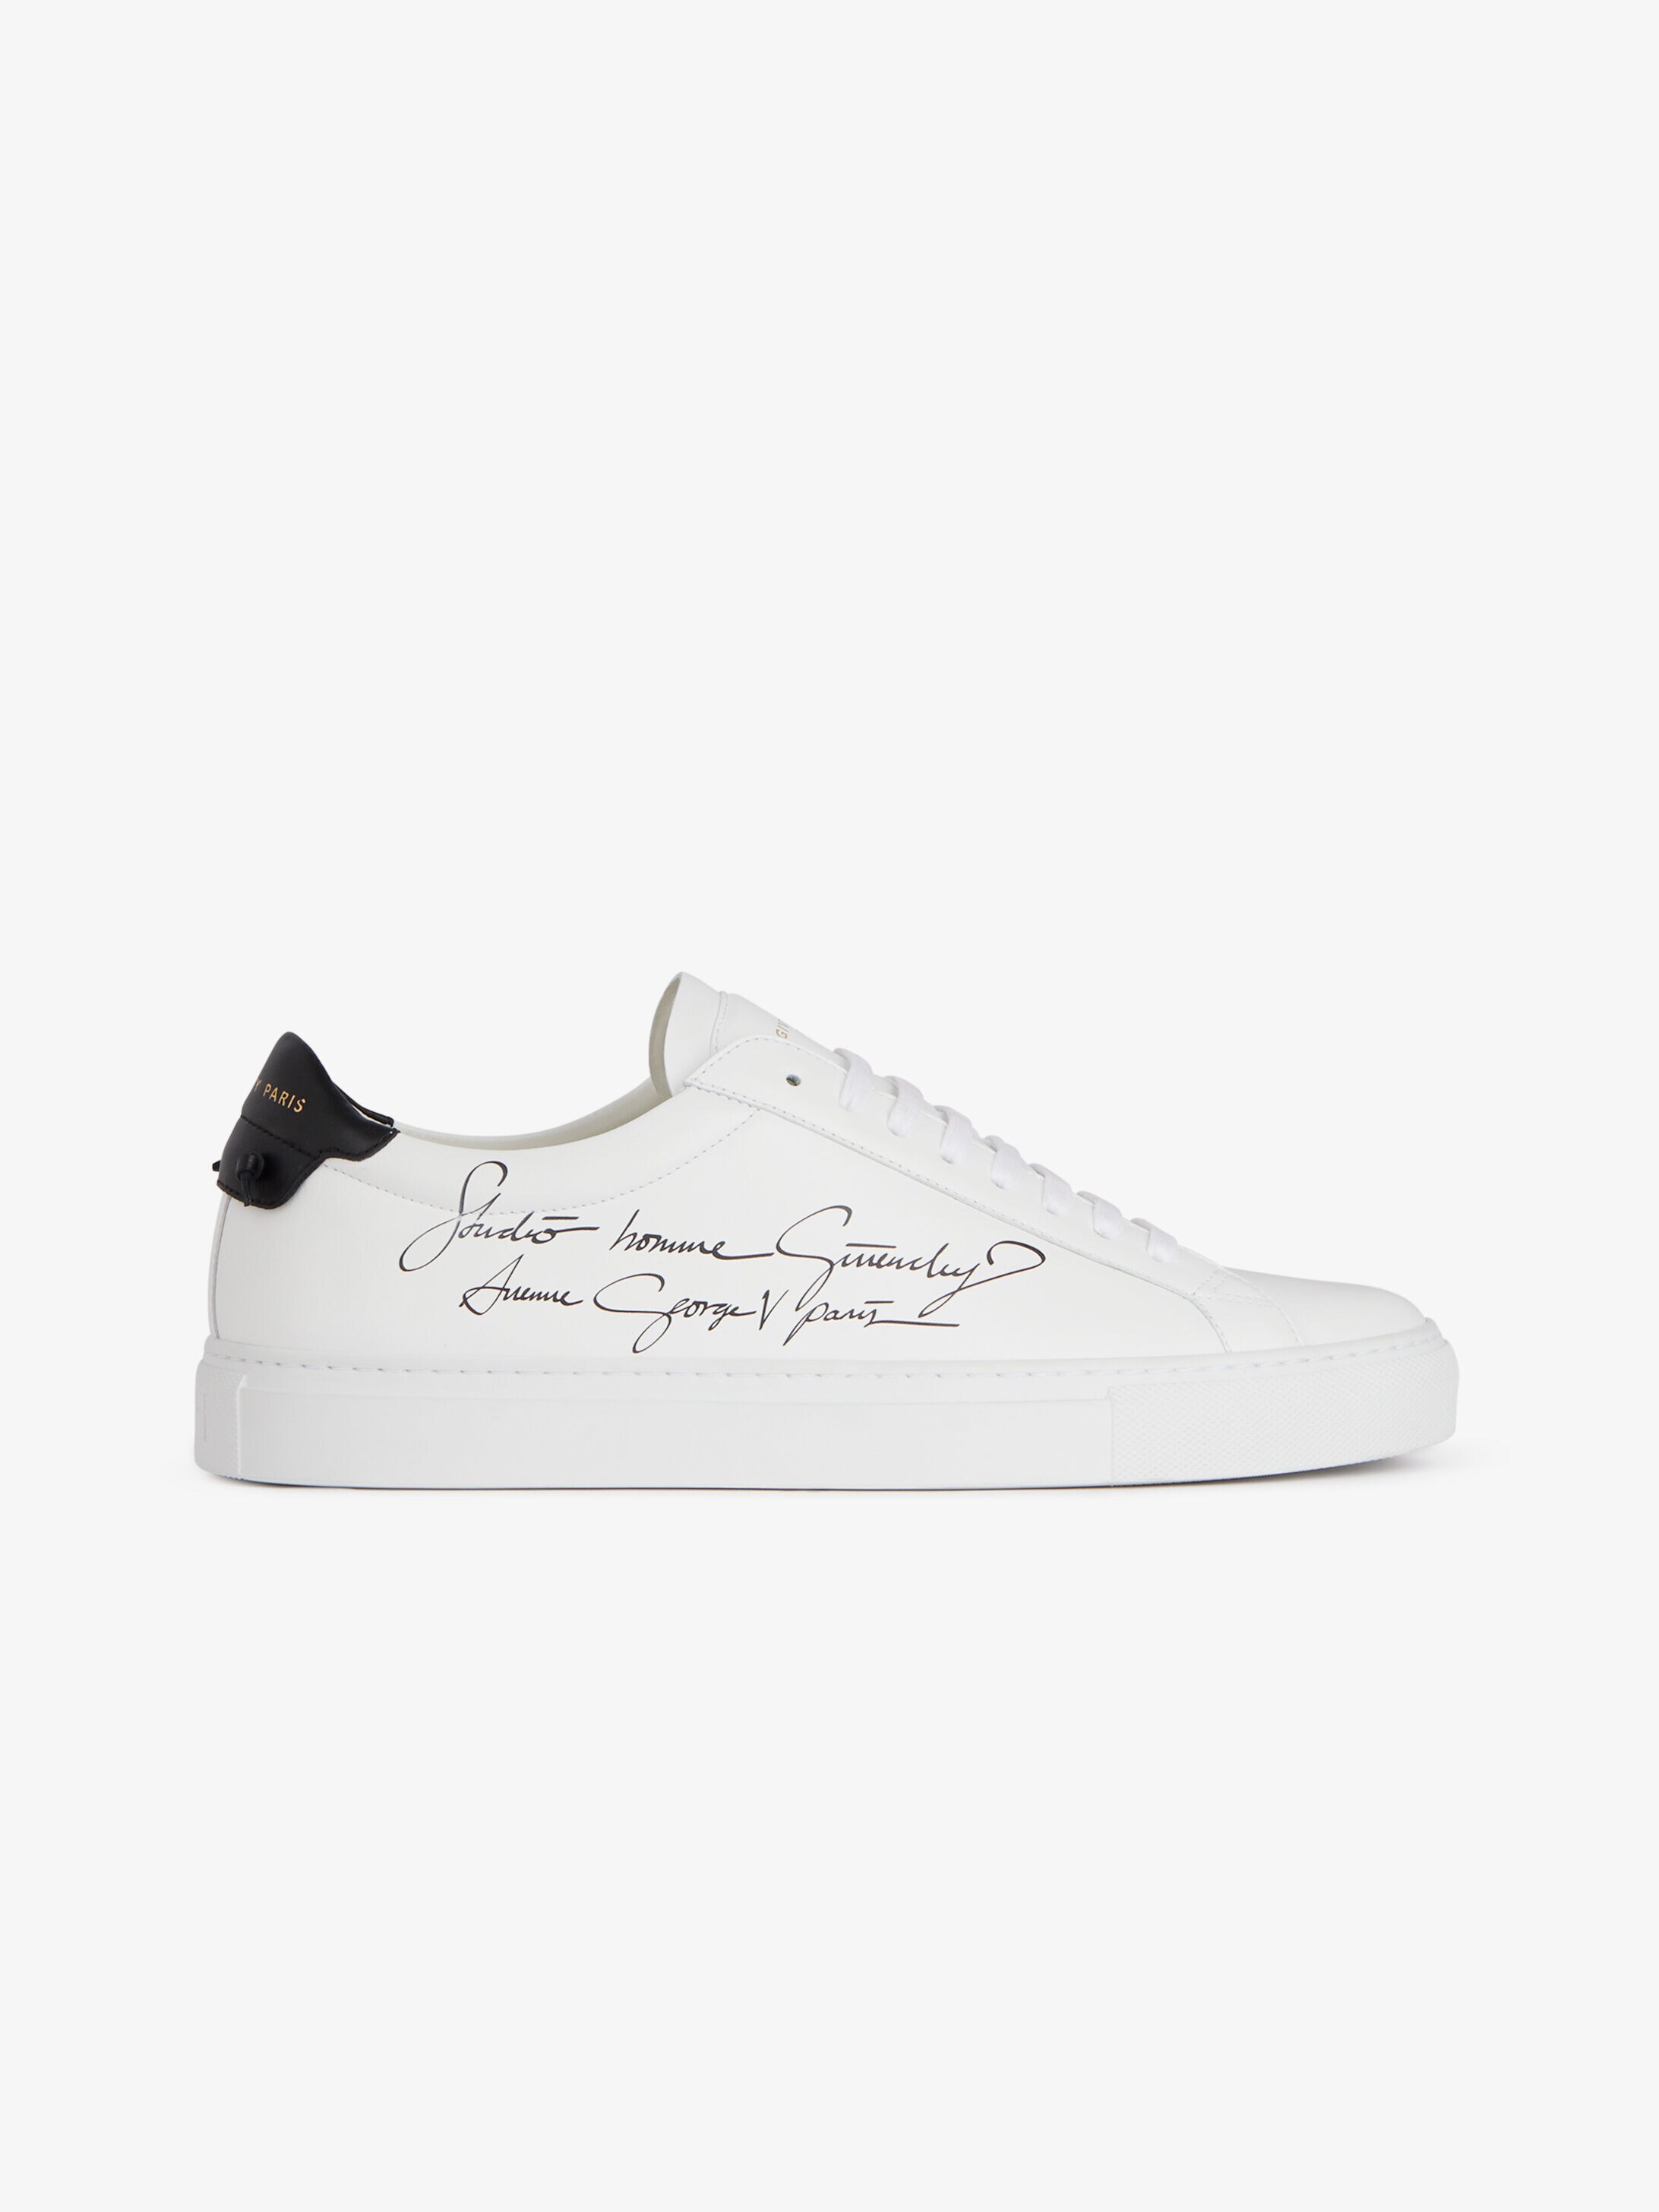 givenchy shoes online